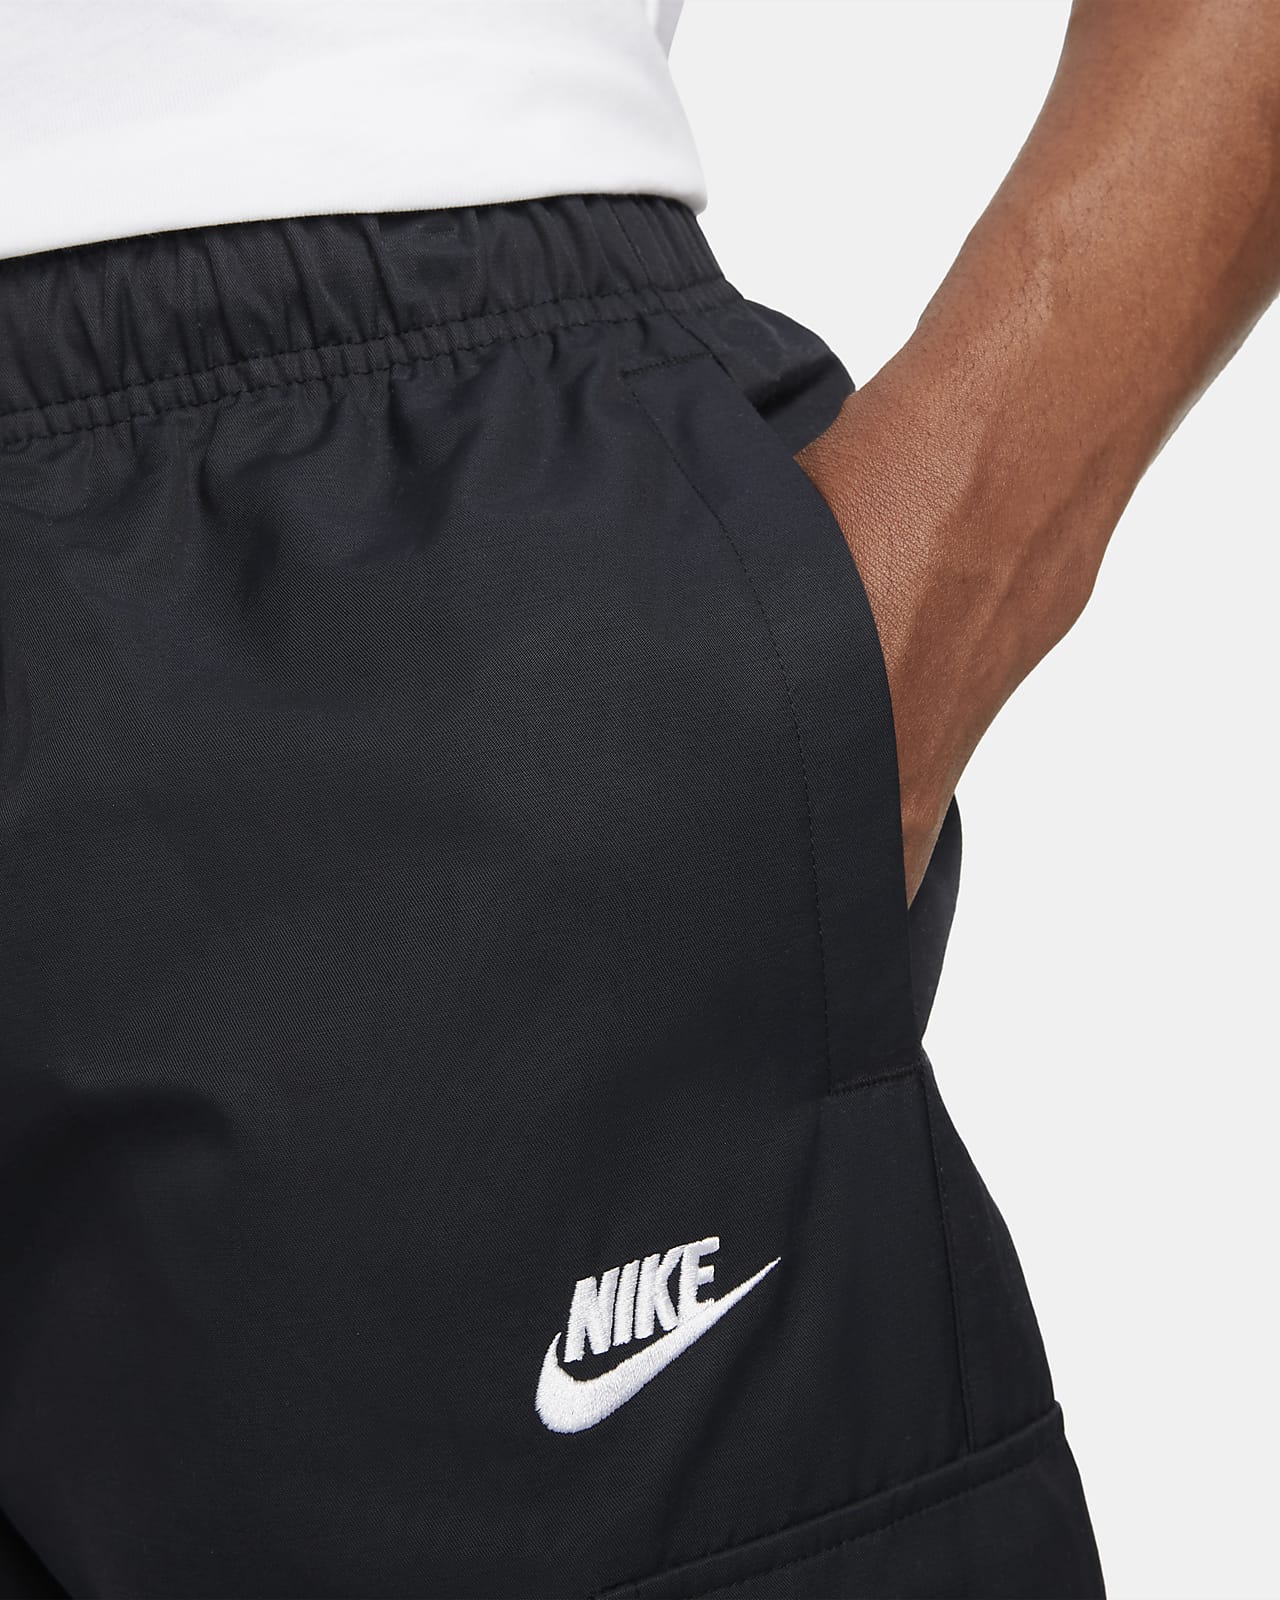 Check out Tech Tight - 588676-330 - by Nike in Long